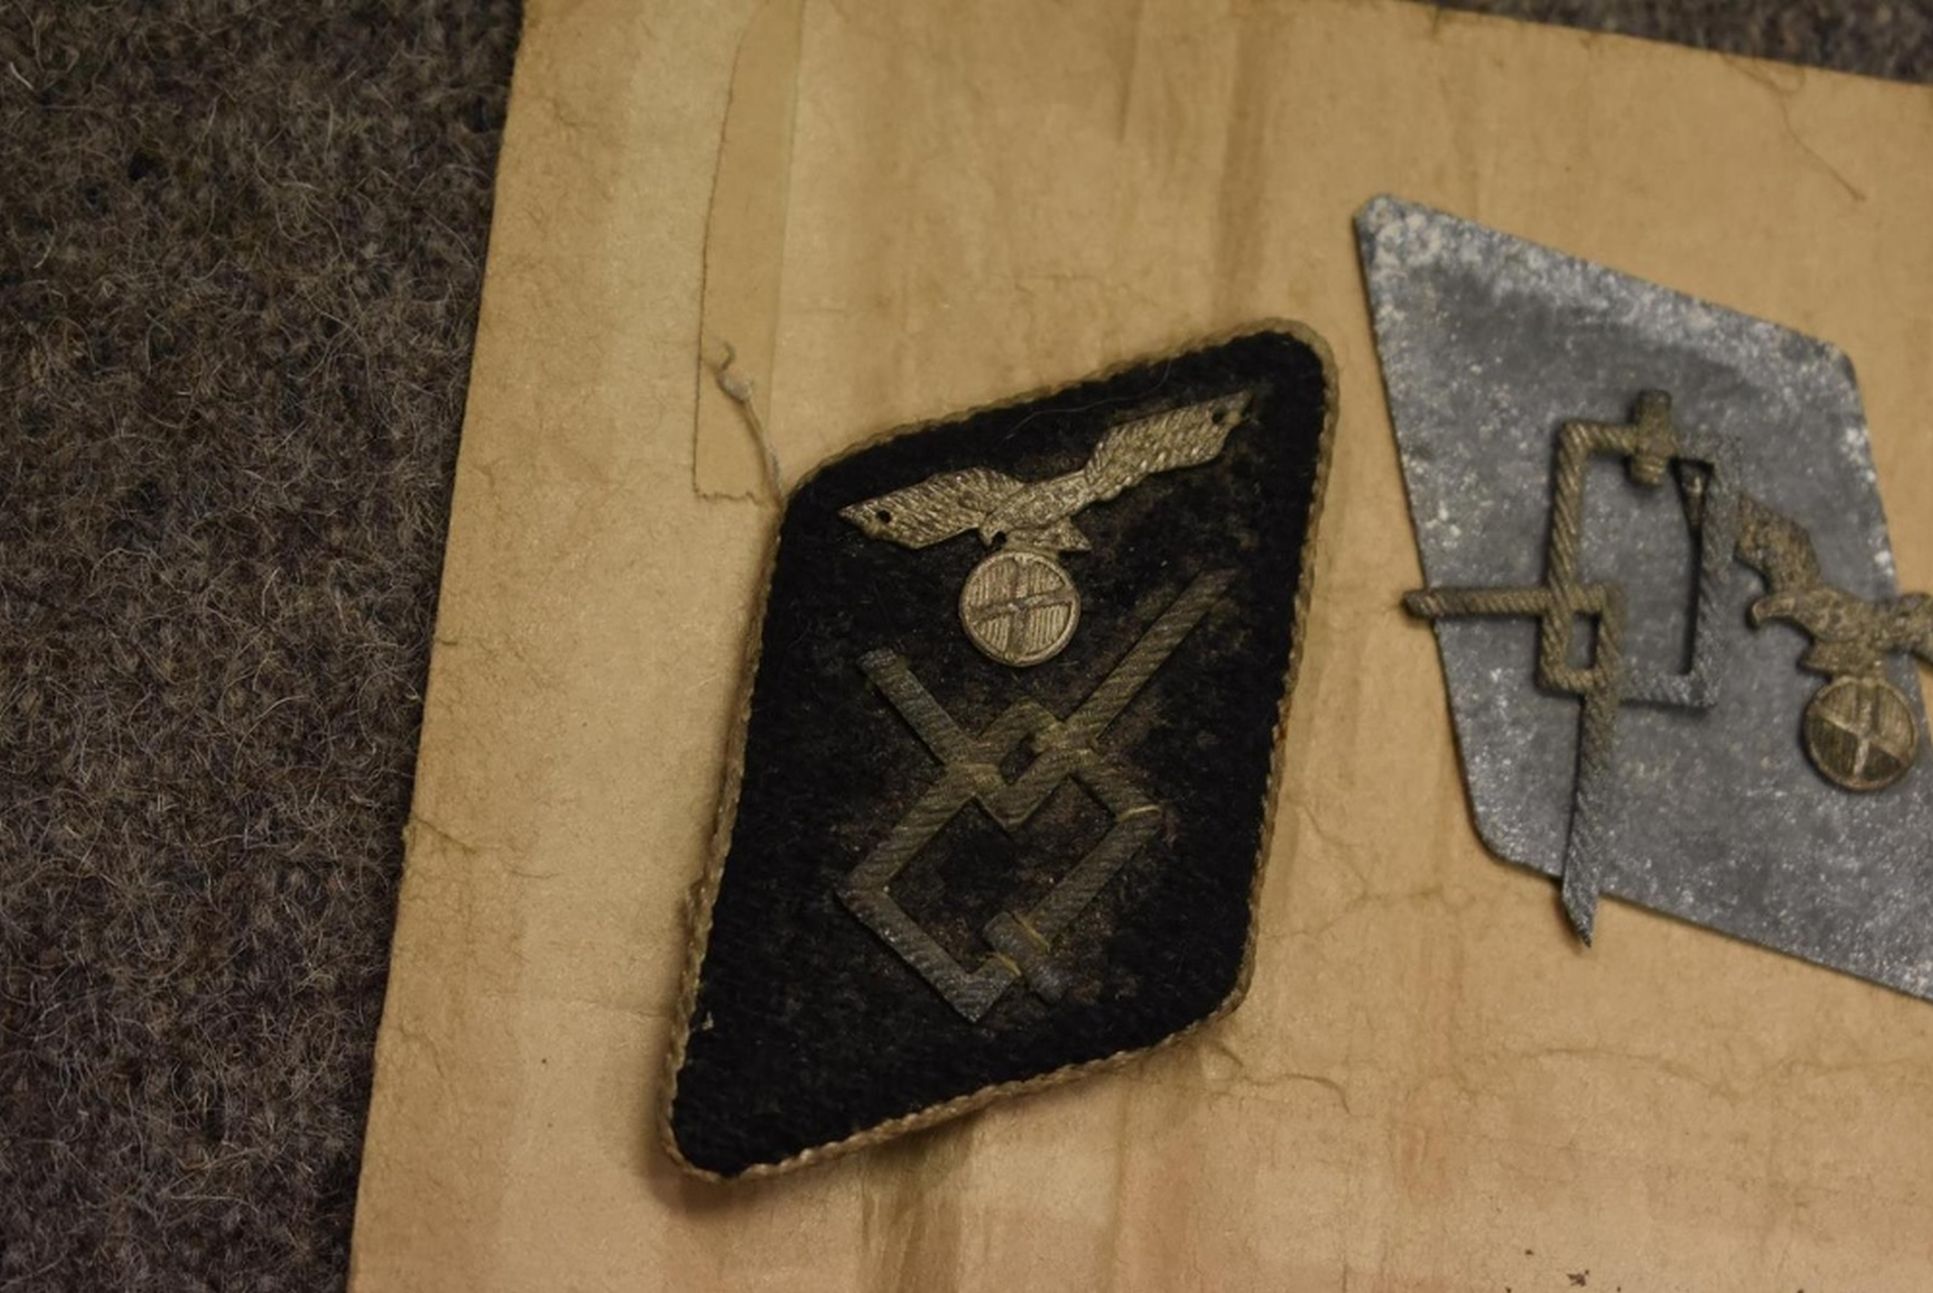 LAPEL BADGE INSIGNIA OF VIDKUN QUISLING, comprising one full collar tab, a backing plate and metal - Image 2 of 5